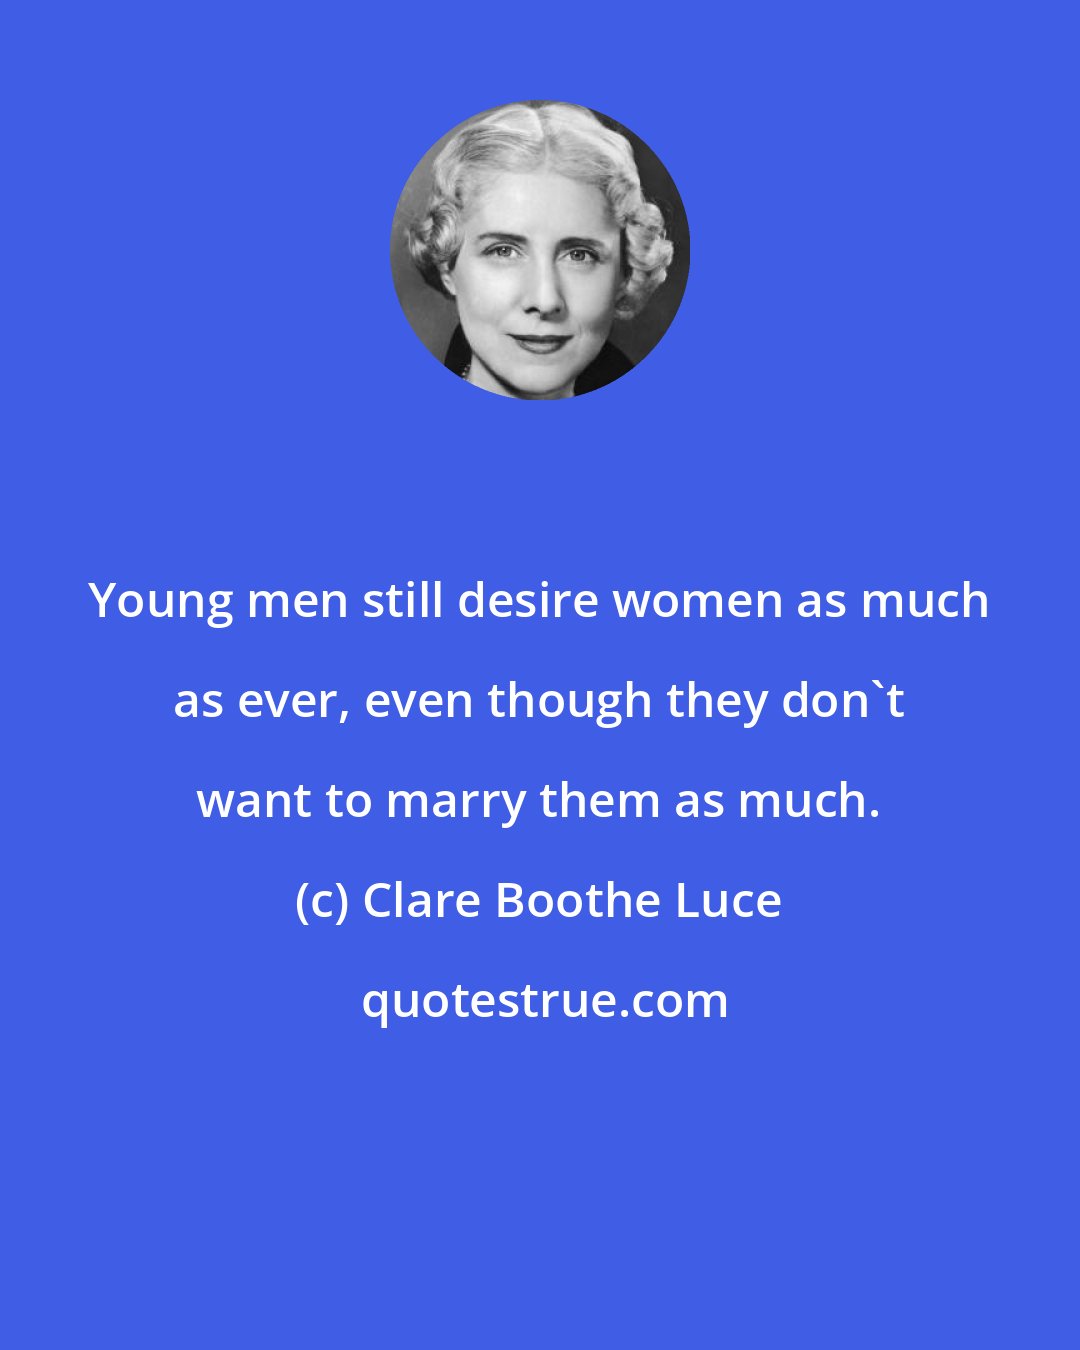 Clare Boothe Luce: Young men still desire women as much as ever, even though they don't want to marry them as much.